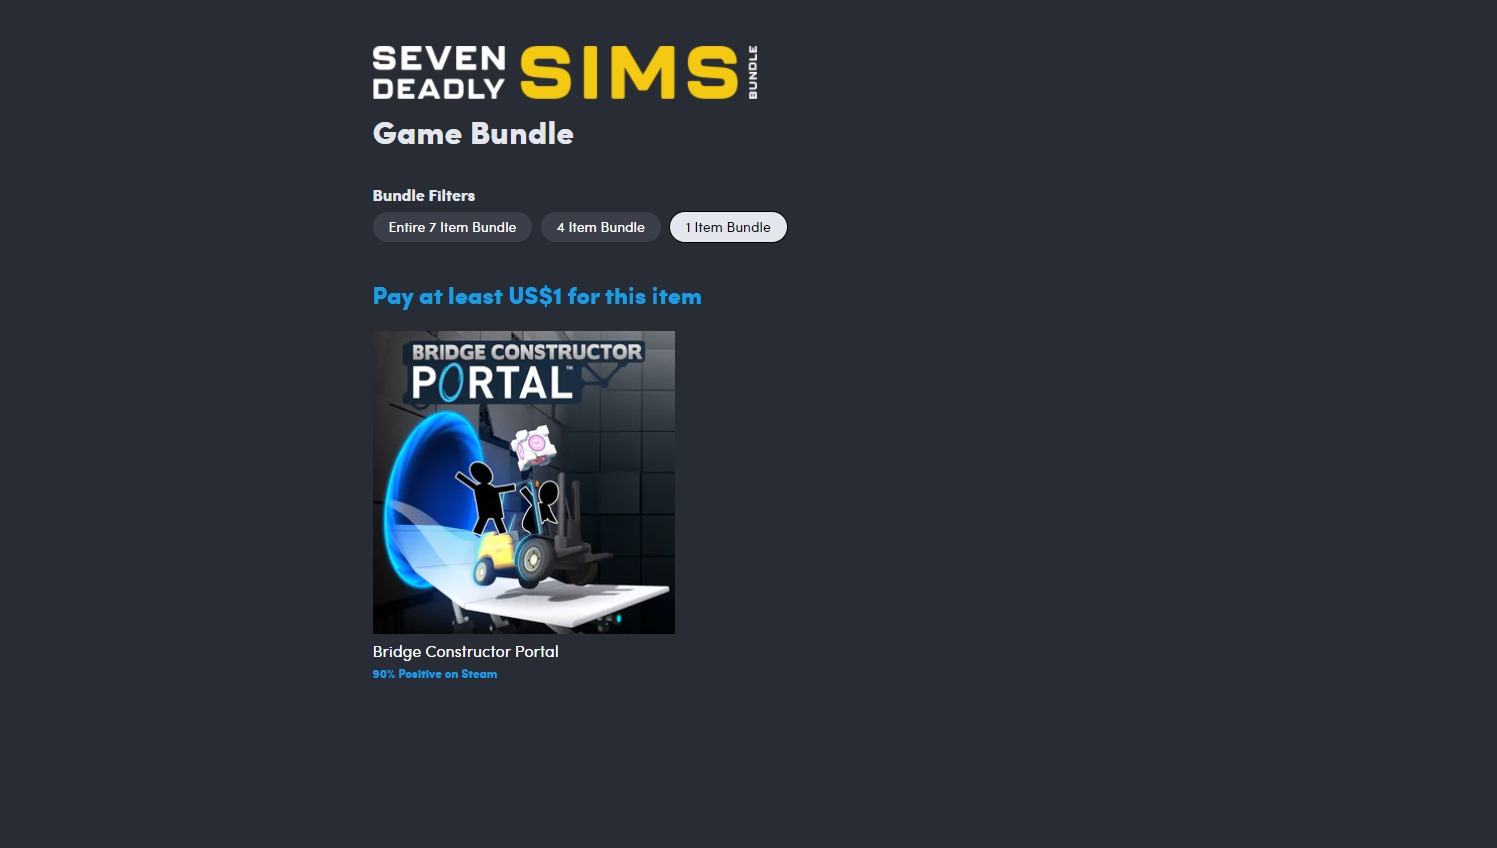 FireShot Capture 034 - Humble Seven Deadly Sims Bundle (pay what you want and help charity)_ - www.humblebundle.com.jpg